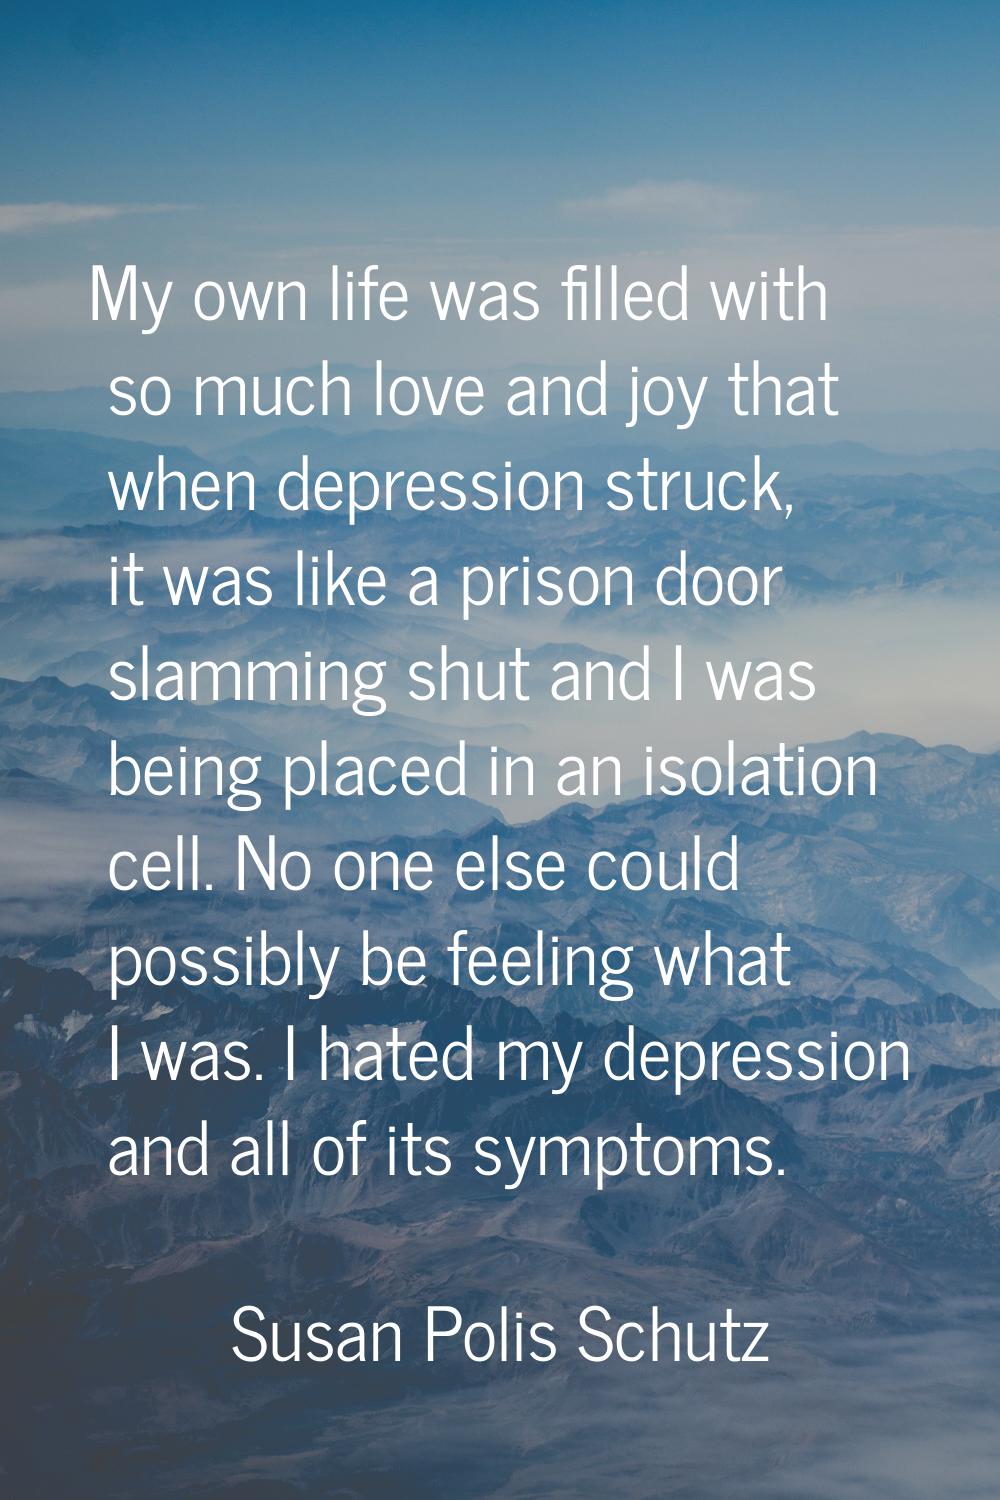 My own life was filled with so much love and joy that when depression struck, it was like a prison 